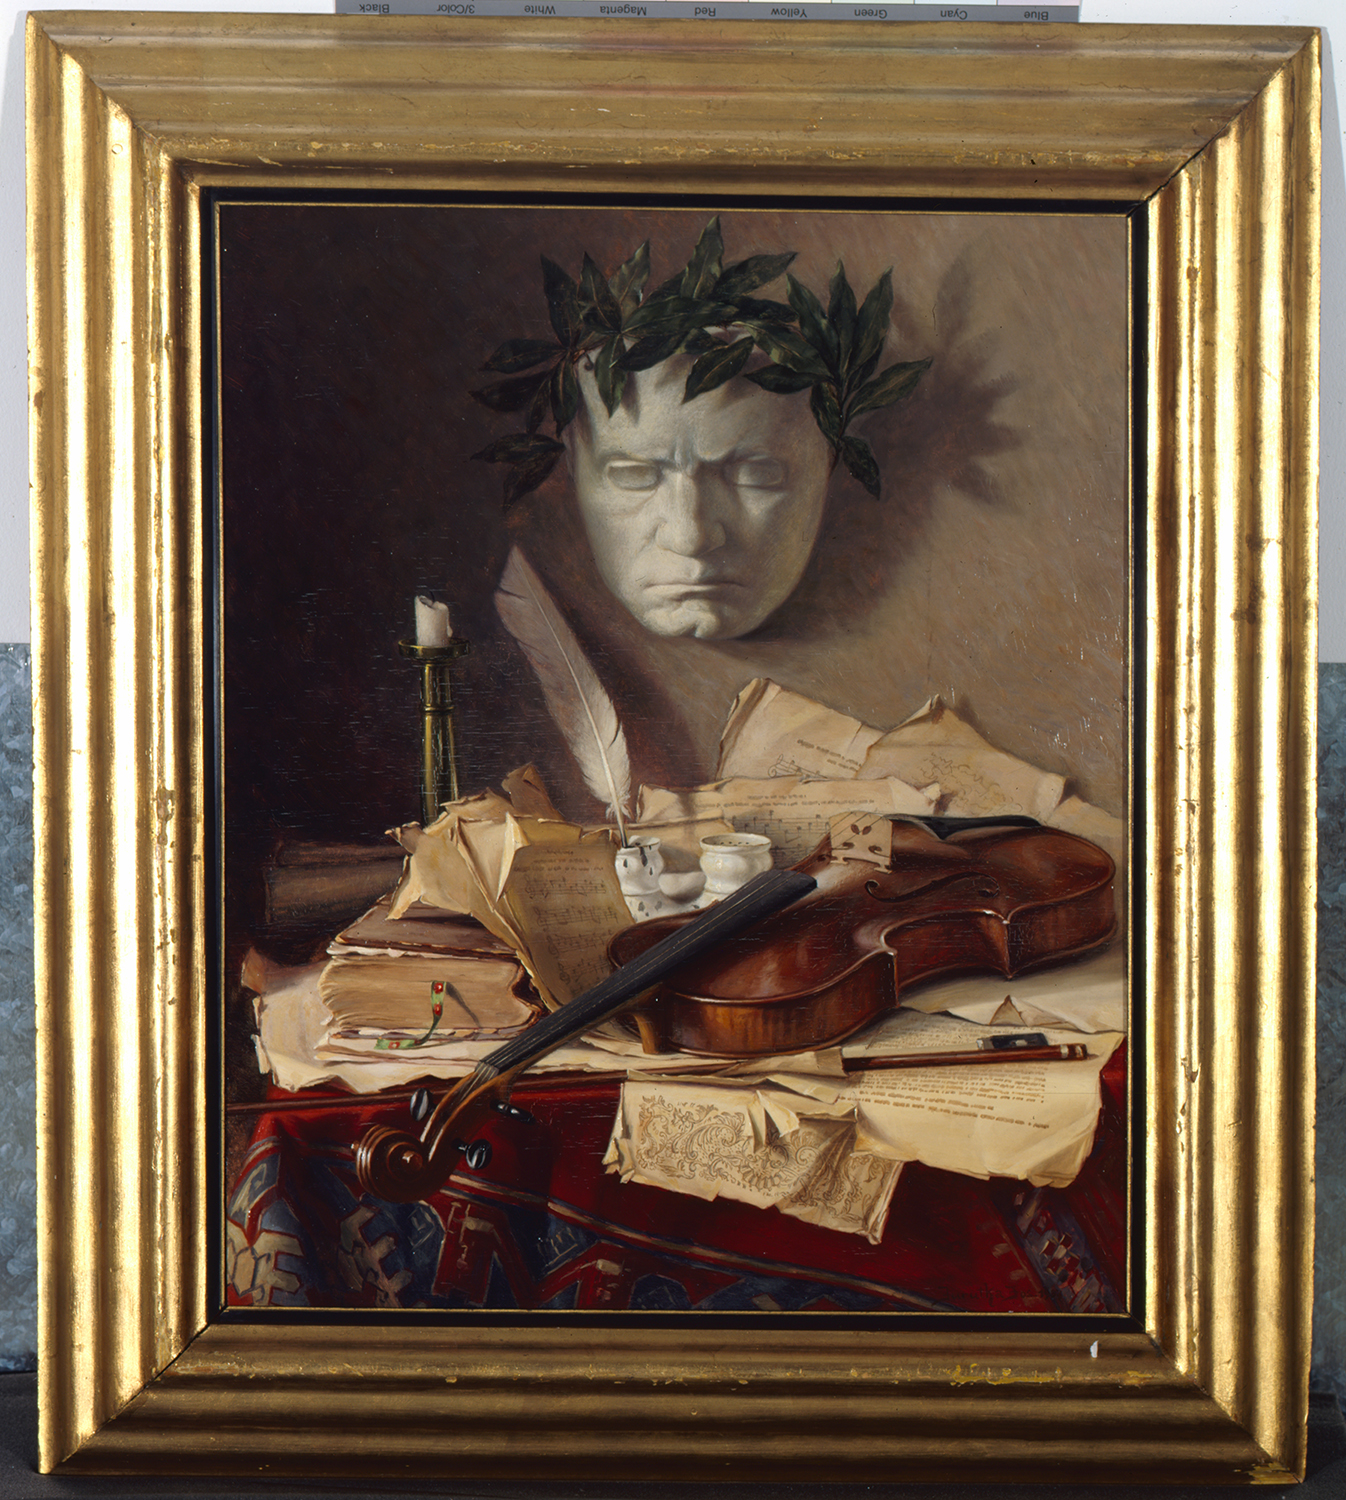 Still live with a mask of Beethoven, Josef Jurutka, Painting, Deutsches Reich 1937 © DHM